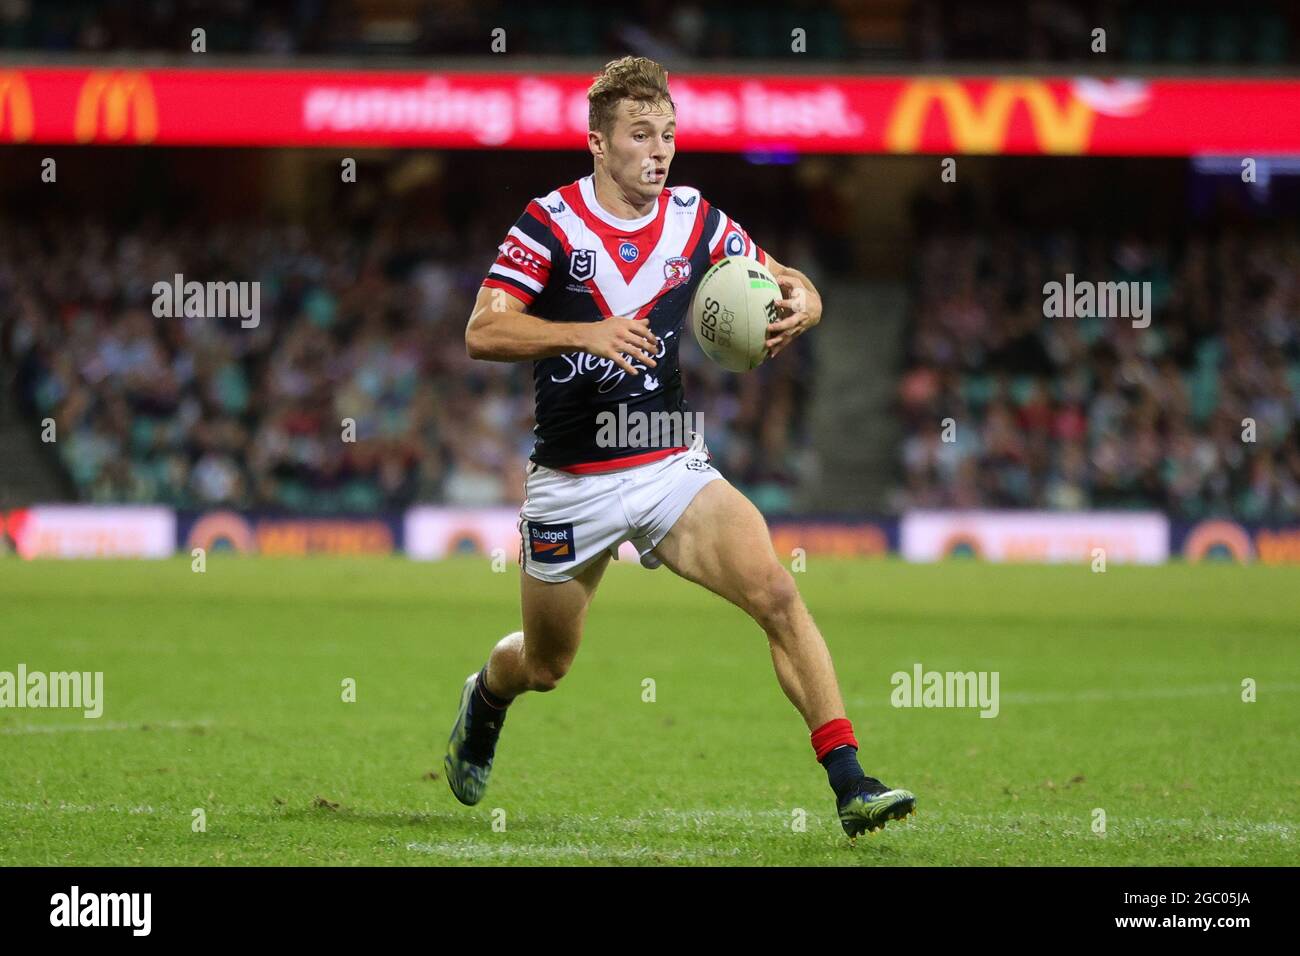 SYDNEY, AUSTRALIA - APRIL 10: Sam Walker of the Roosters about to score a try during the round five NRL match between the Sydney Roosters and Cronulla Sharks at the Sydney Cricket Ground on April 10, 2021 in Sydney, Australia.  Credit: Pete Dovgan/Speed Media/Alamy Live News Stock Photo